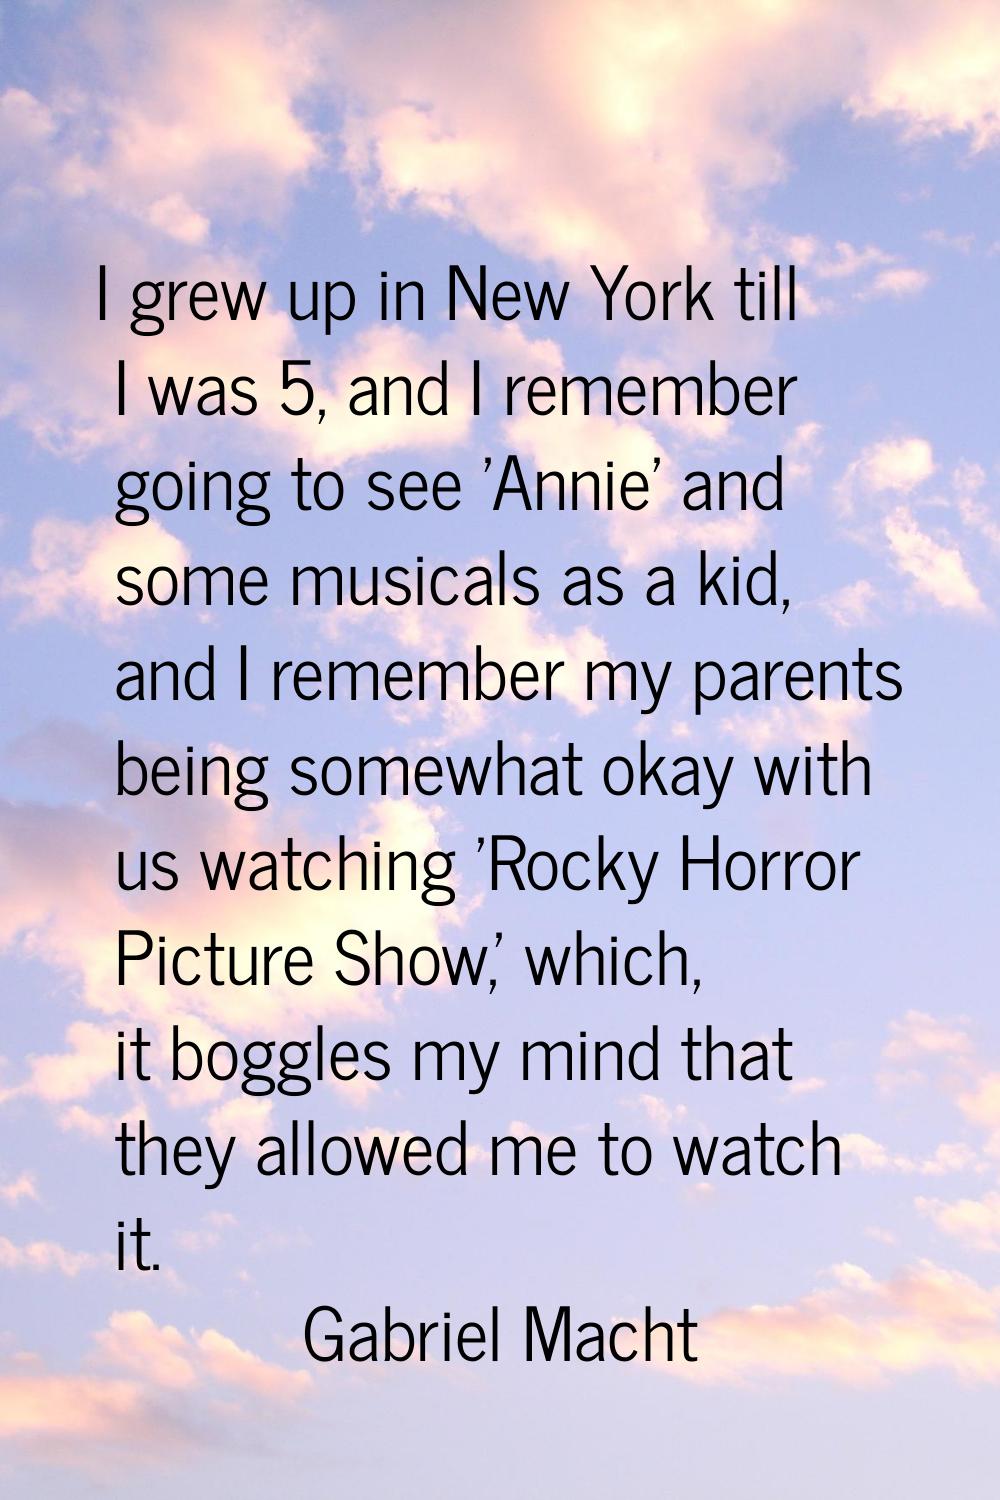 I grew up in New York till I was 5, and I remember going to see 'Annie' and some musicals as a kid,